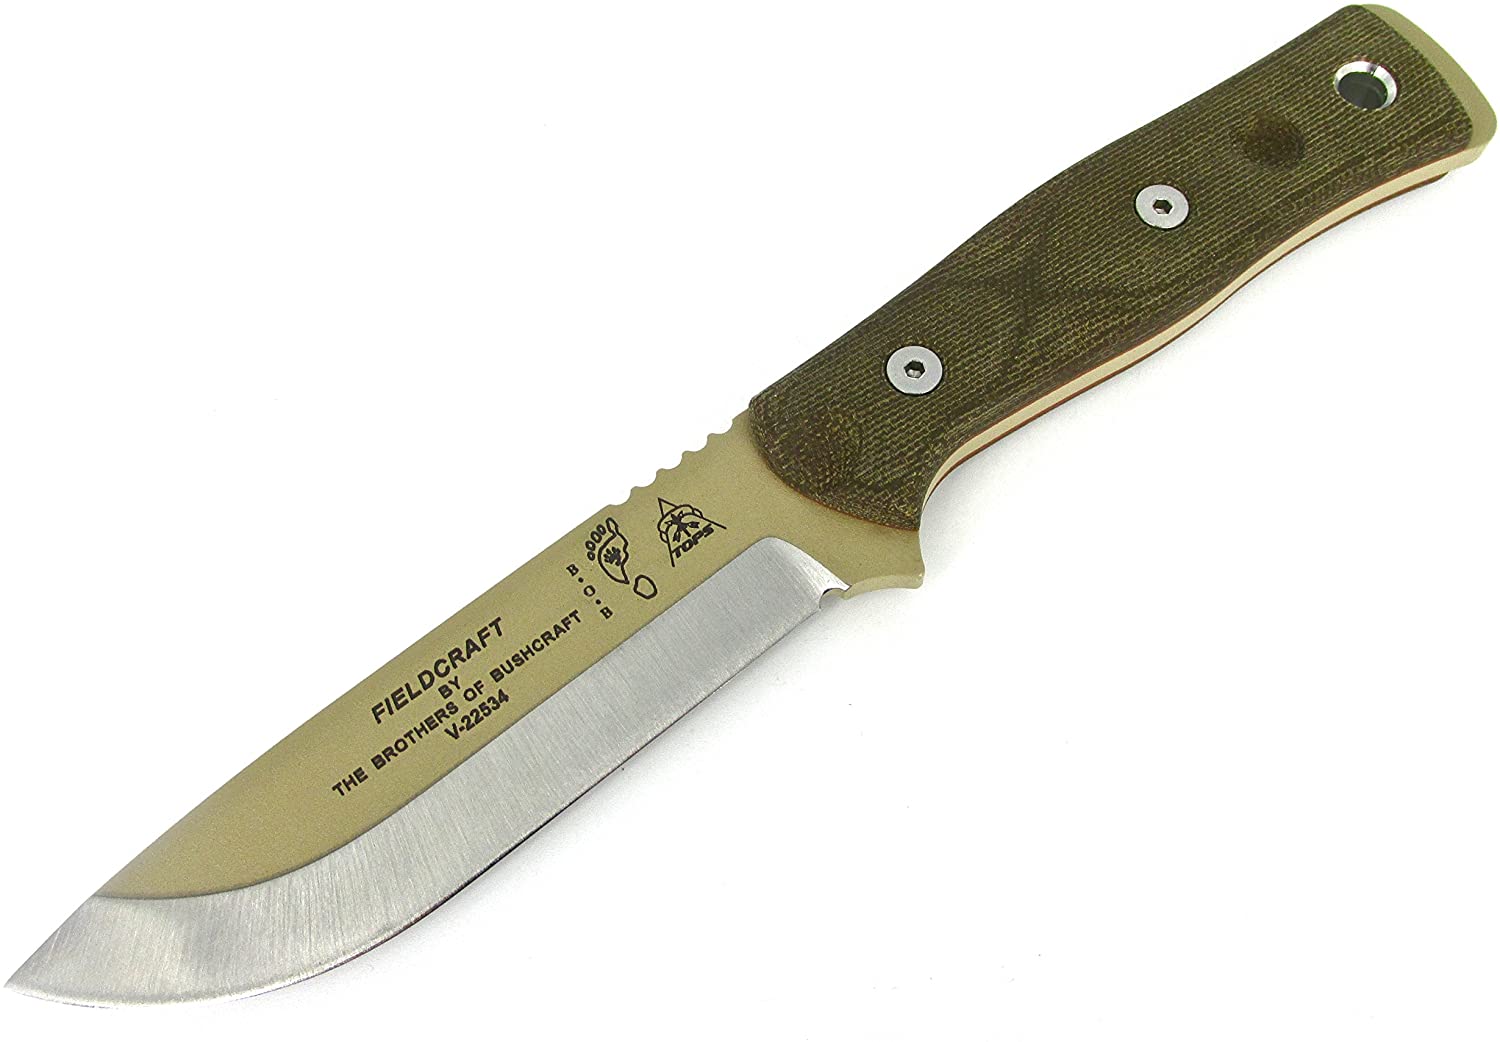 Tops Brothers of Bushcraft Survival Knife